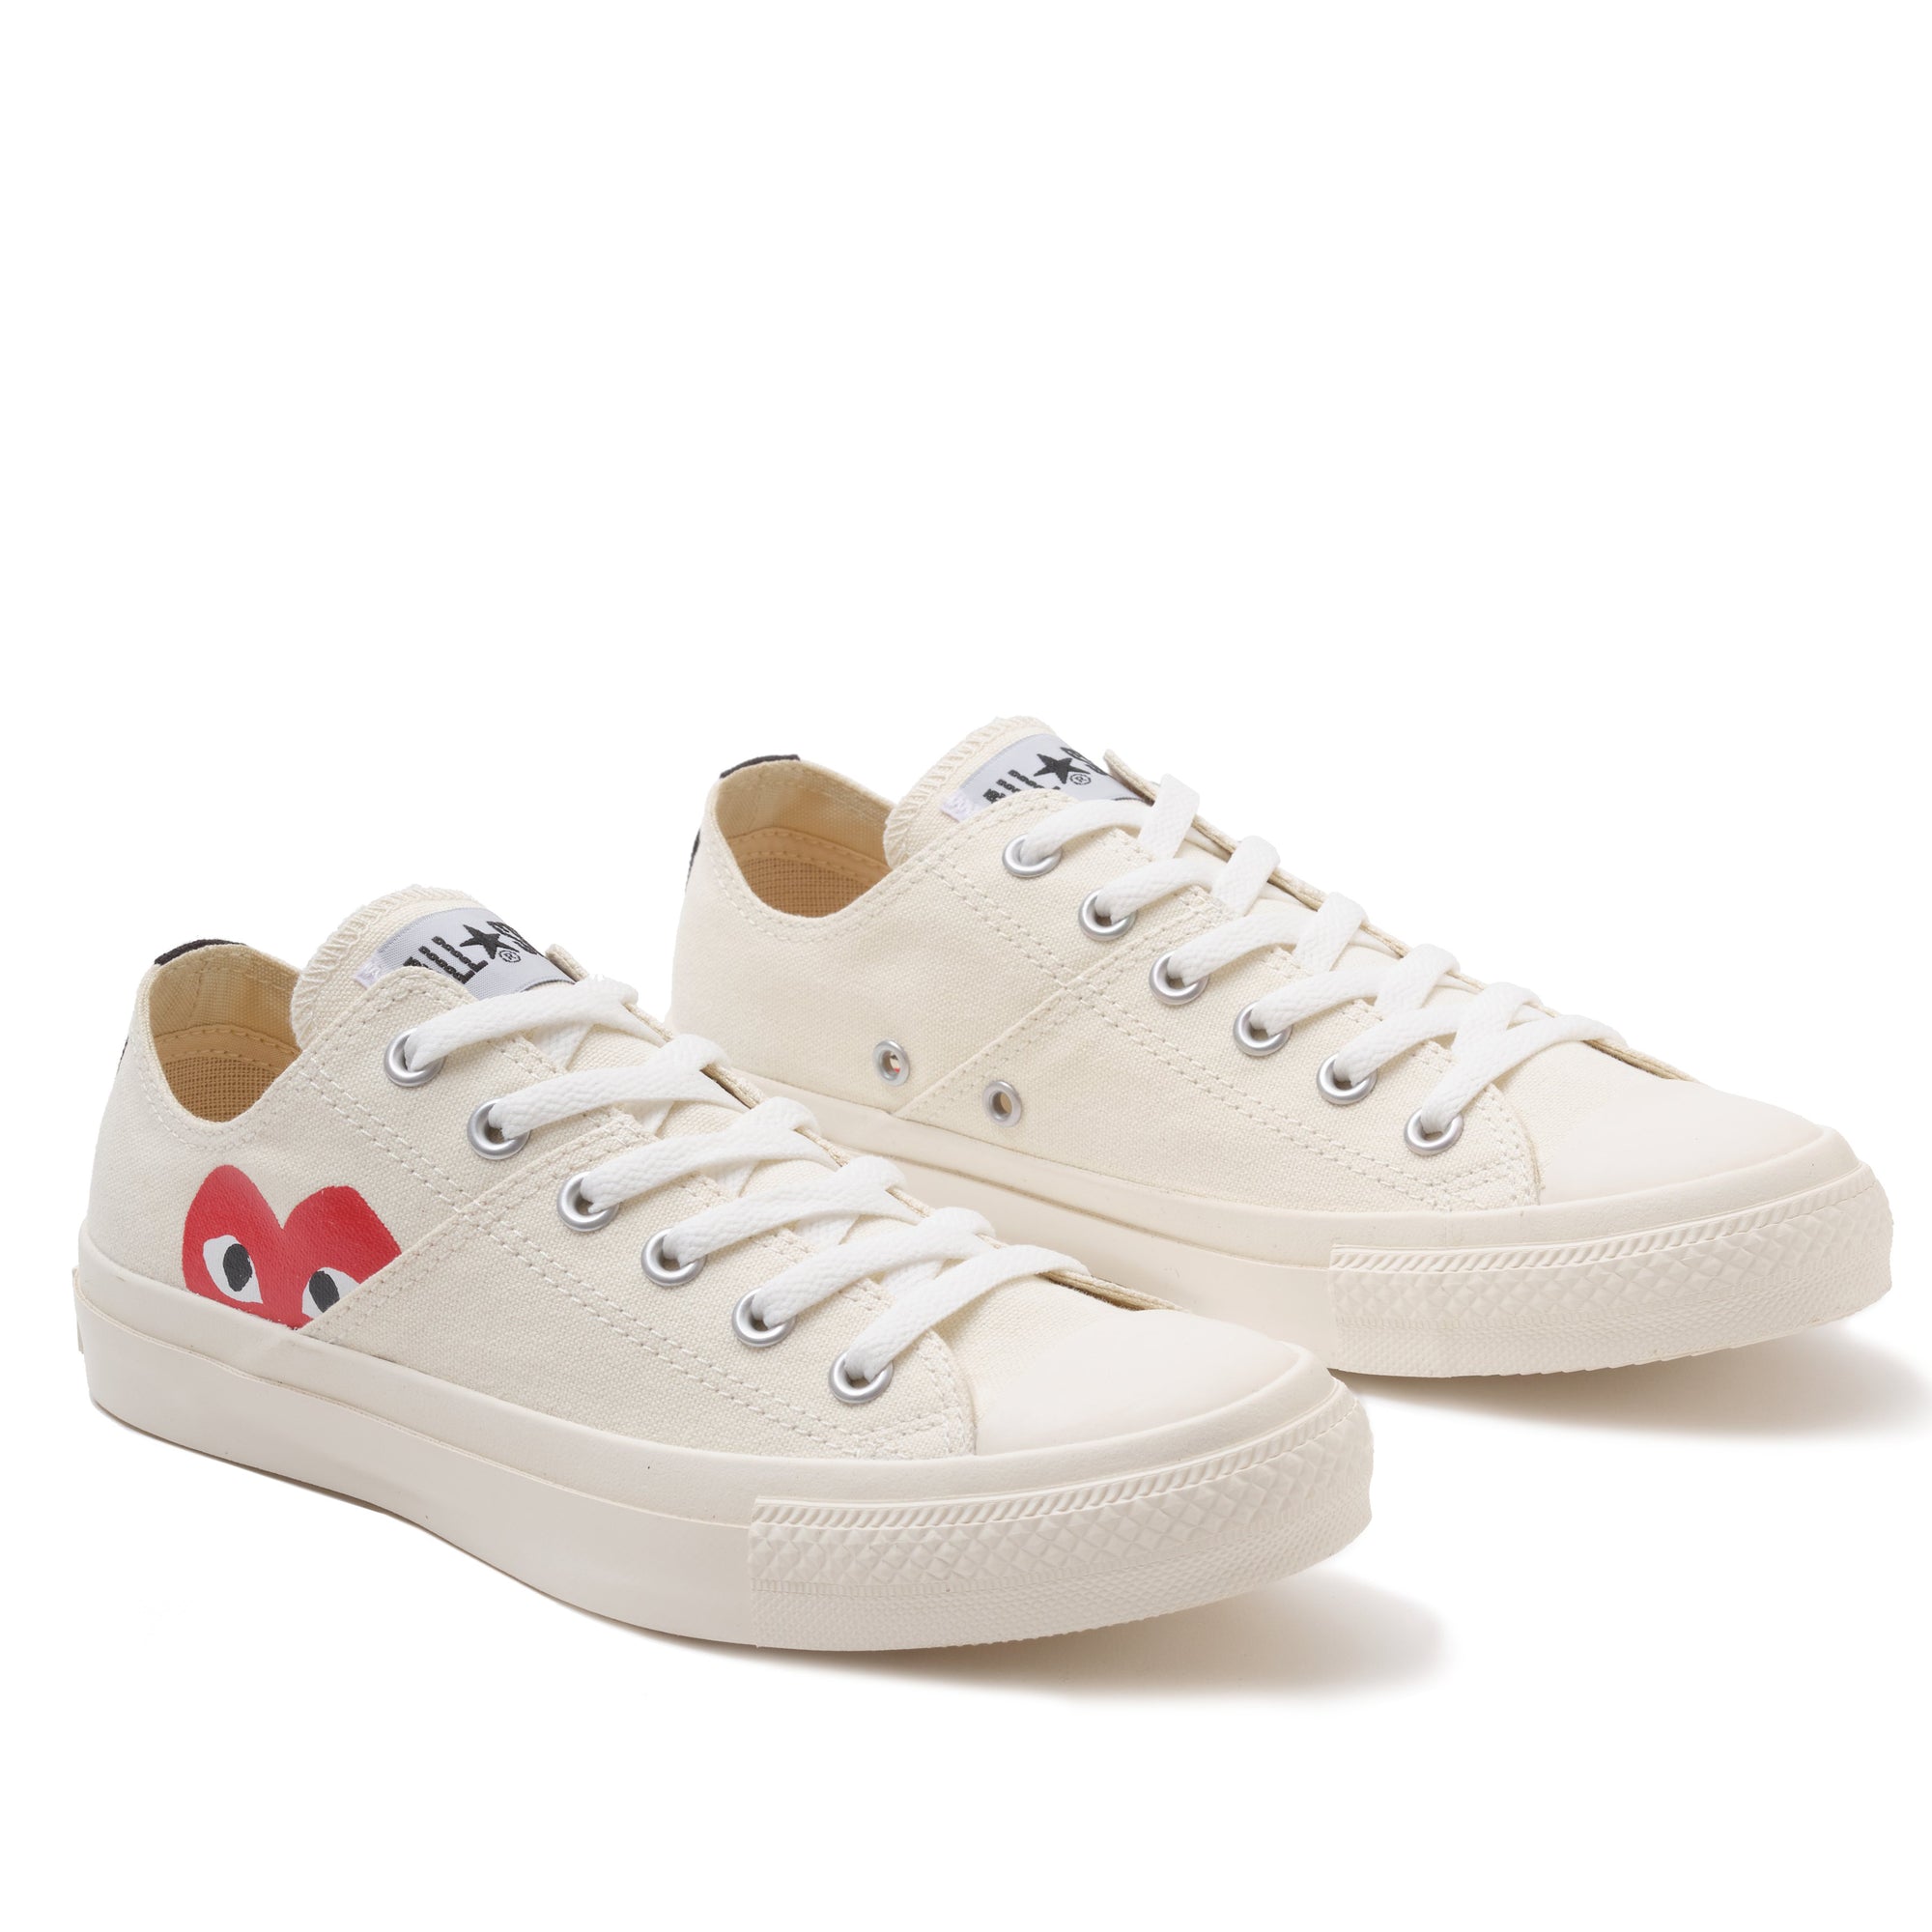 PLAY CDG CONVERSE ALL STAR LOW - (WHITE) – DSMG